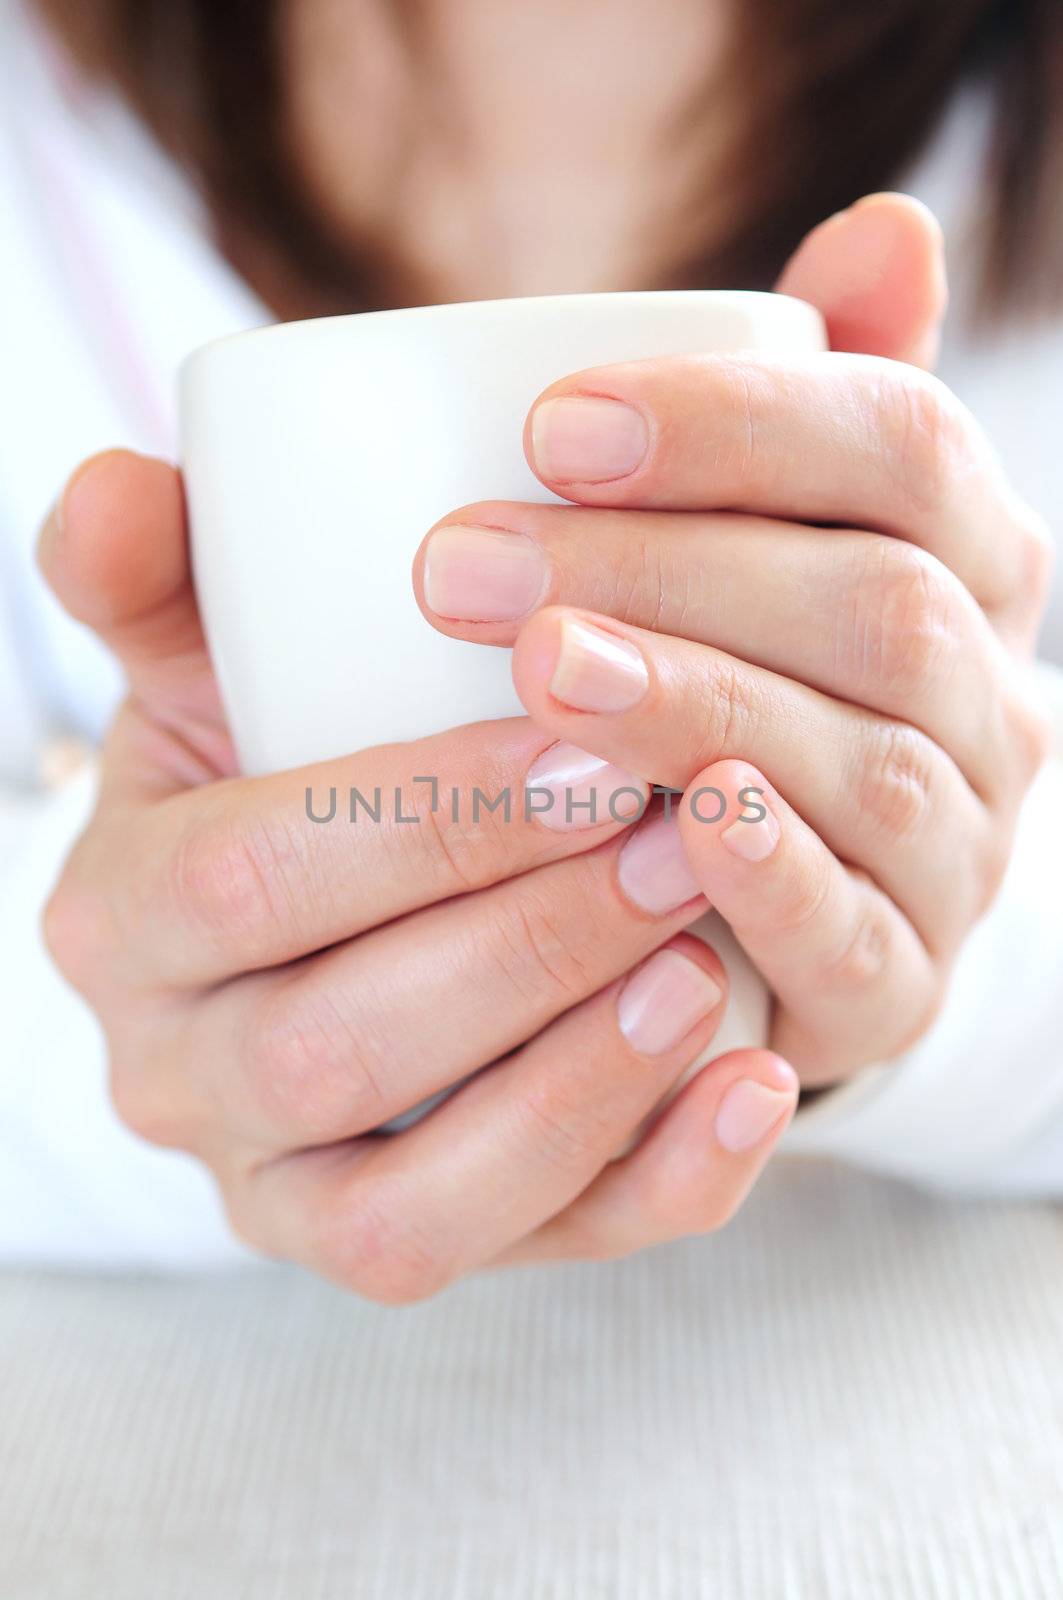 Hands holding a cup by elenathewise